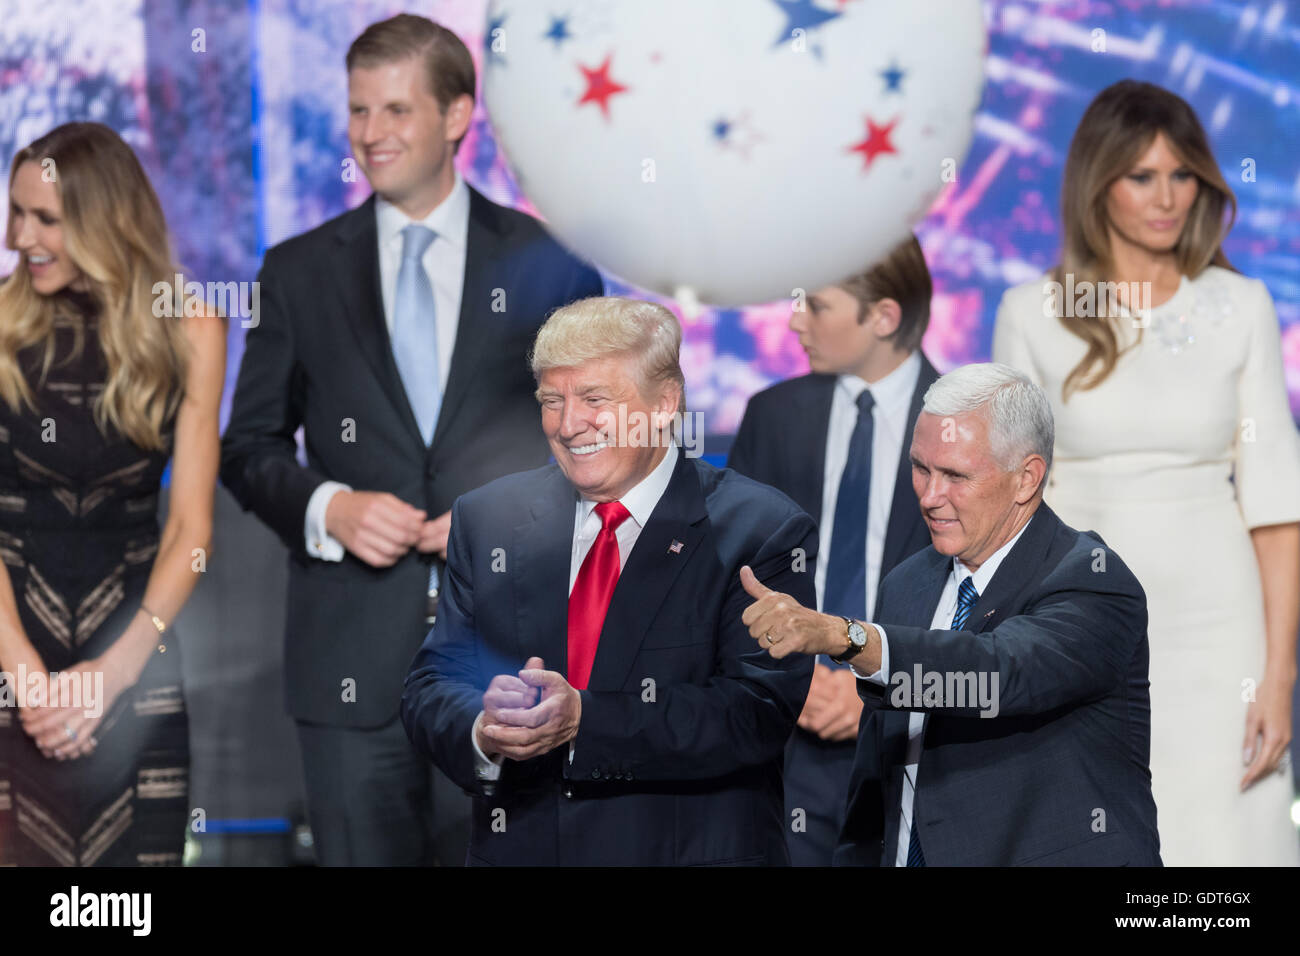 Cleveland, Ohio, USA. 21st July, 2016. GOP Presidential candidate Donald Trump and running mate Gov. Mike Pence and their families stand on stage as balloons and confetti drop after accepting the party nomination for president on the final day of the Republican National Convention July 21, 2016 in Cleveland, Ohio. Credit:  Planetpix/Alamy Live News Stock Photo